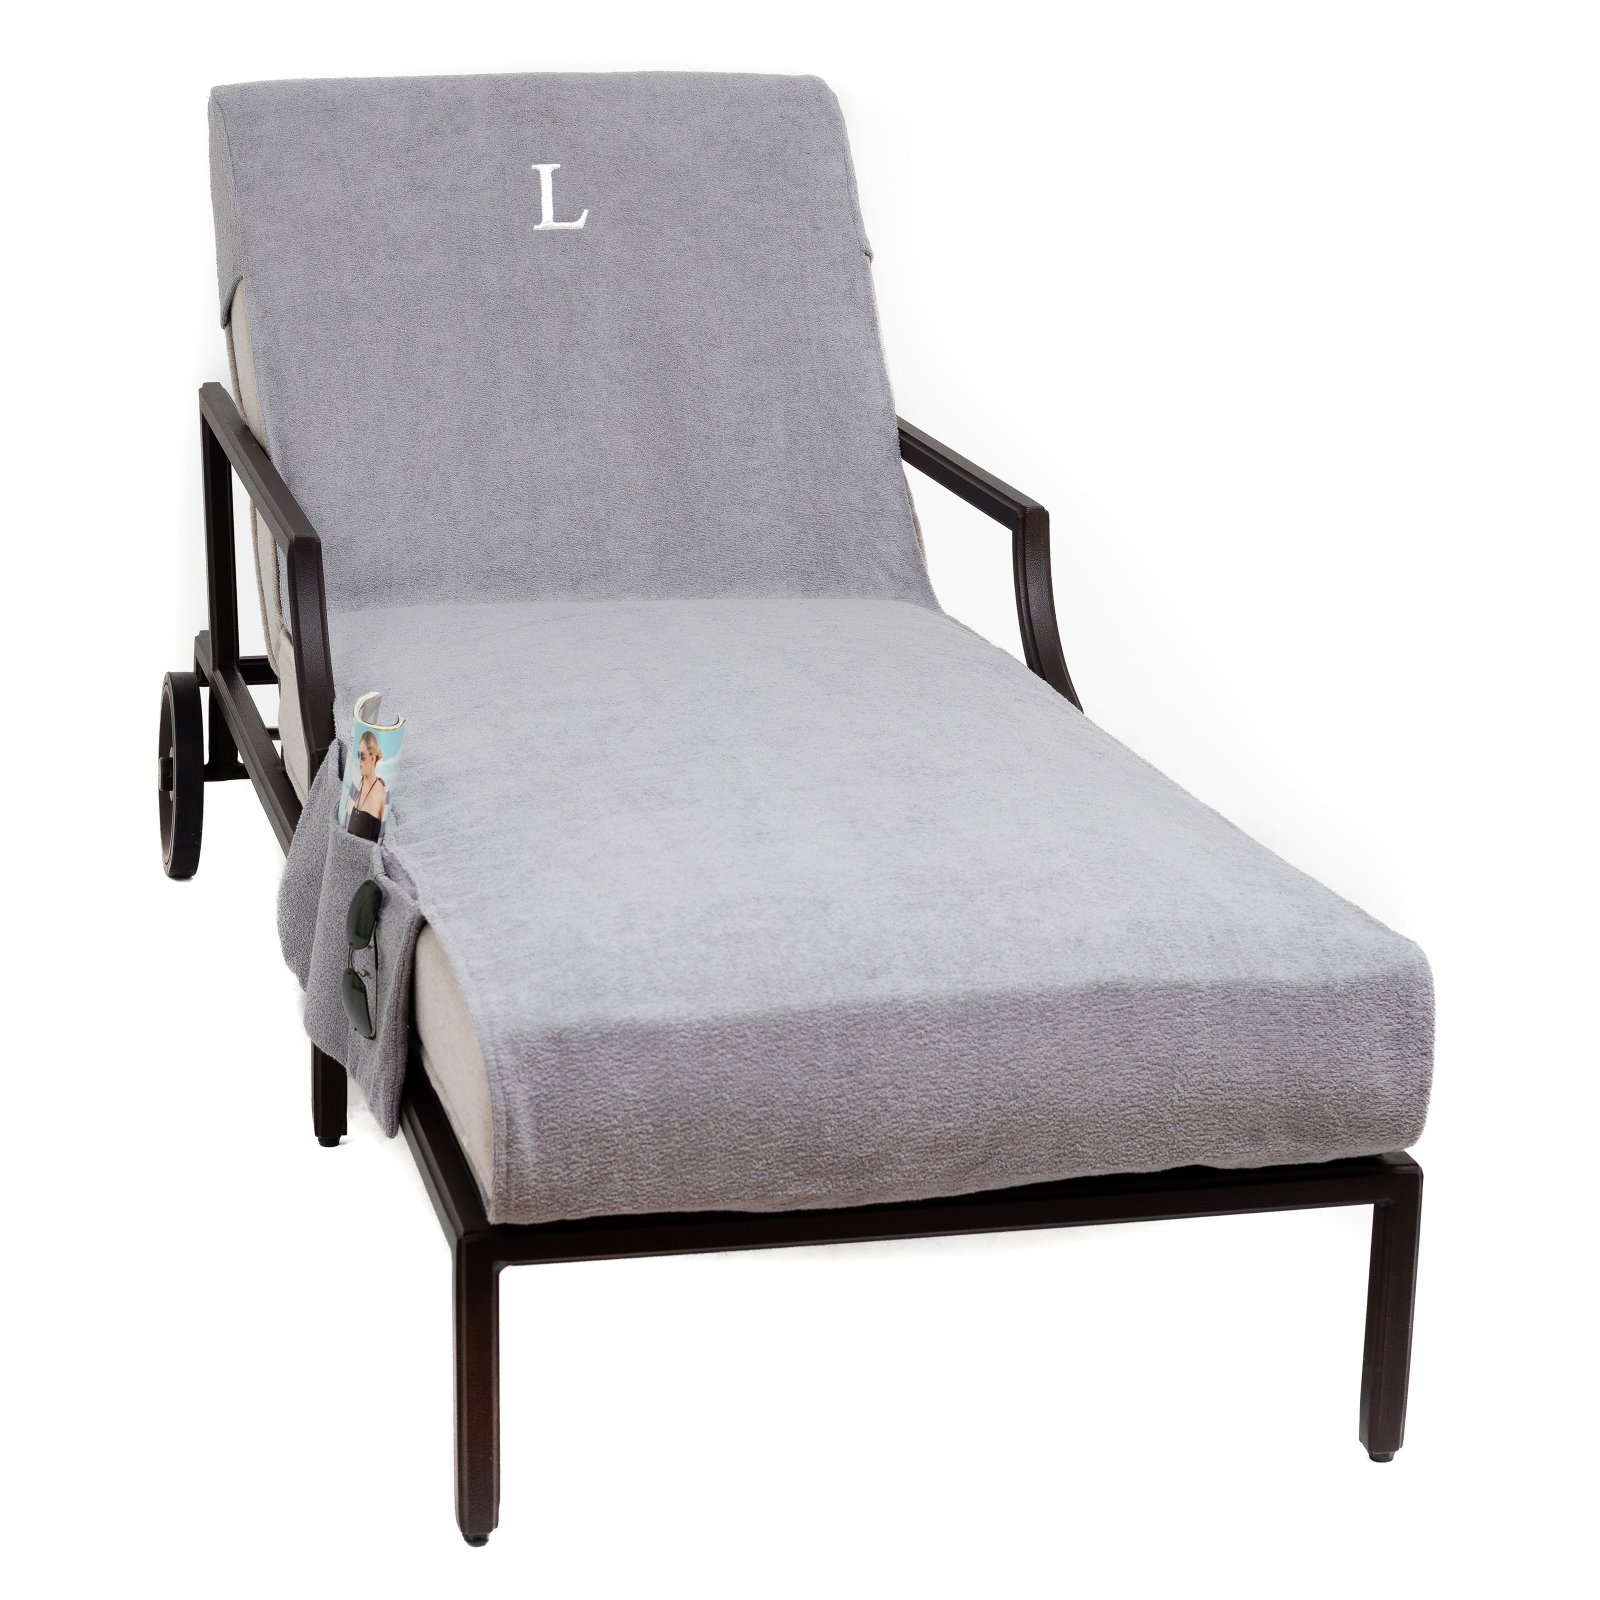 Linum Home Textiles Monogrammed Chaise Lounge Cover with Side Pockets - image 1 of 11